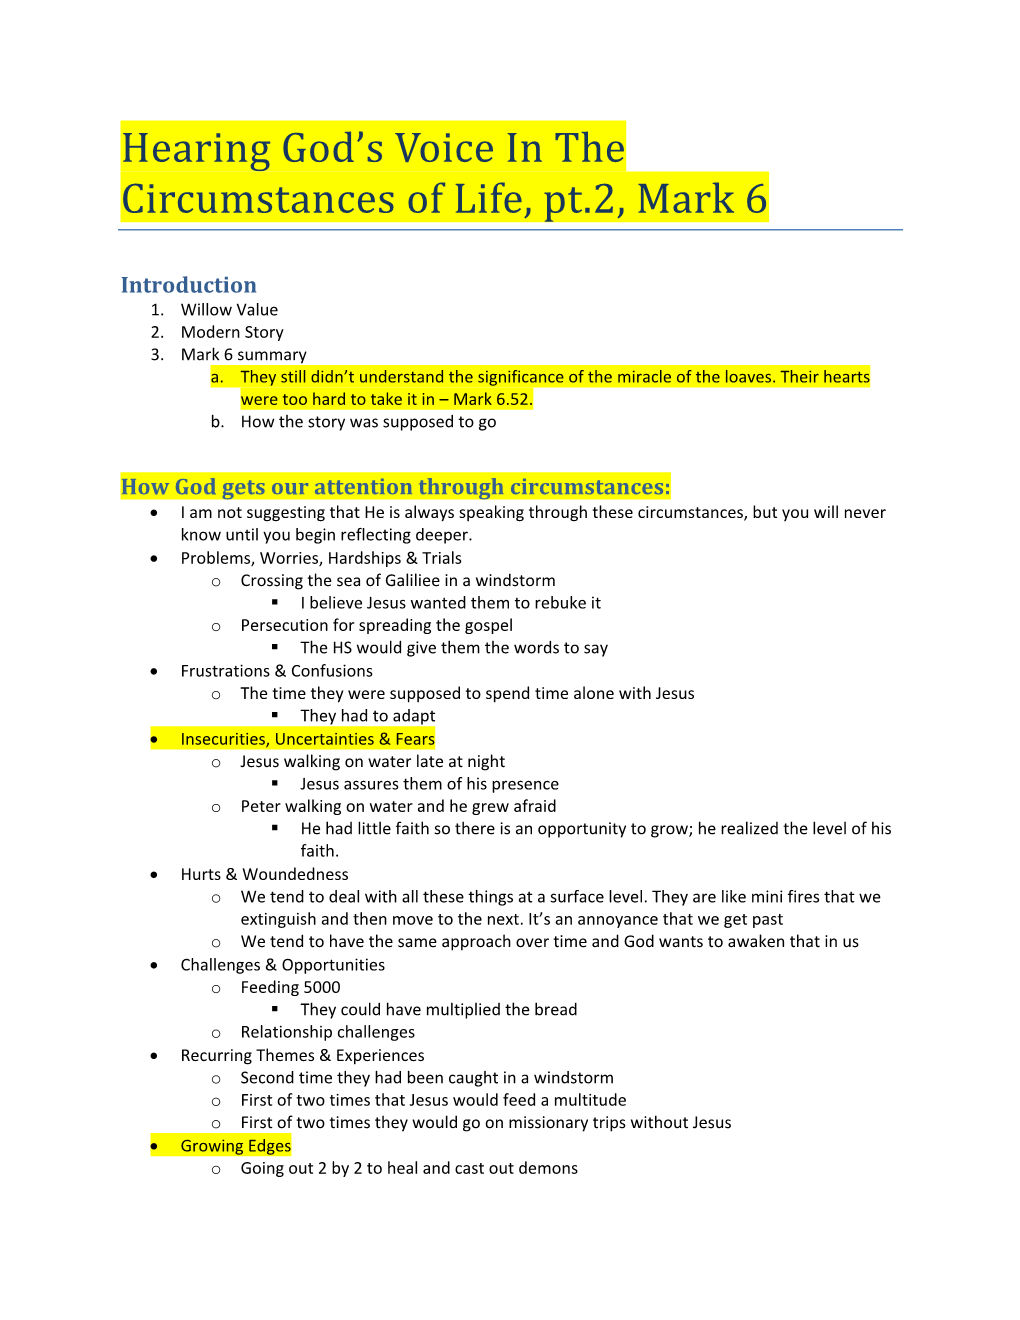 Hearing God's Voice in the Circumstances of Life, Pt.2, Mark 6